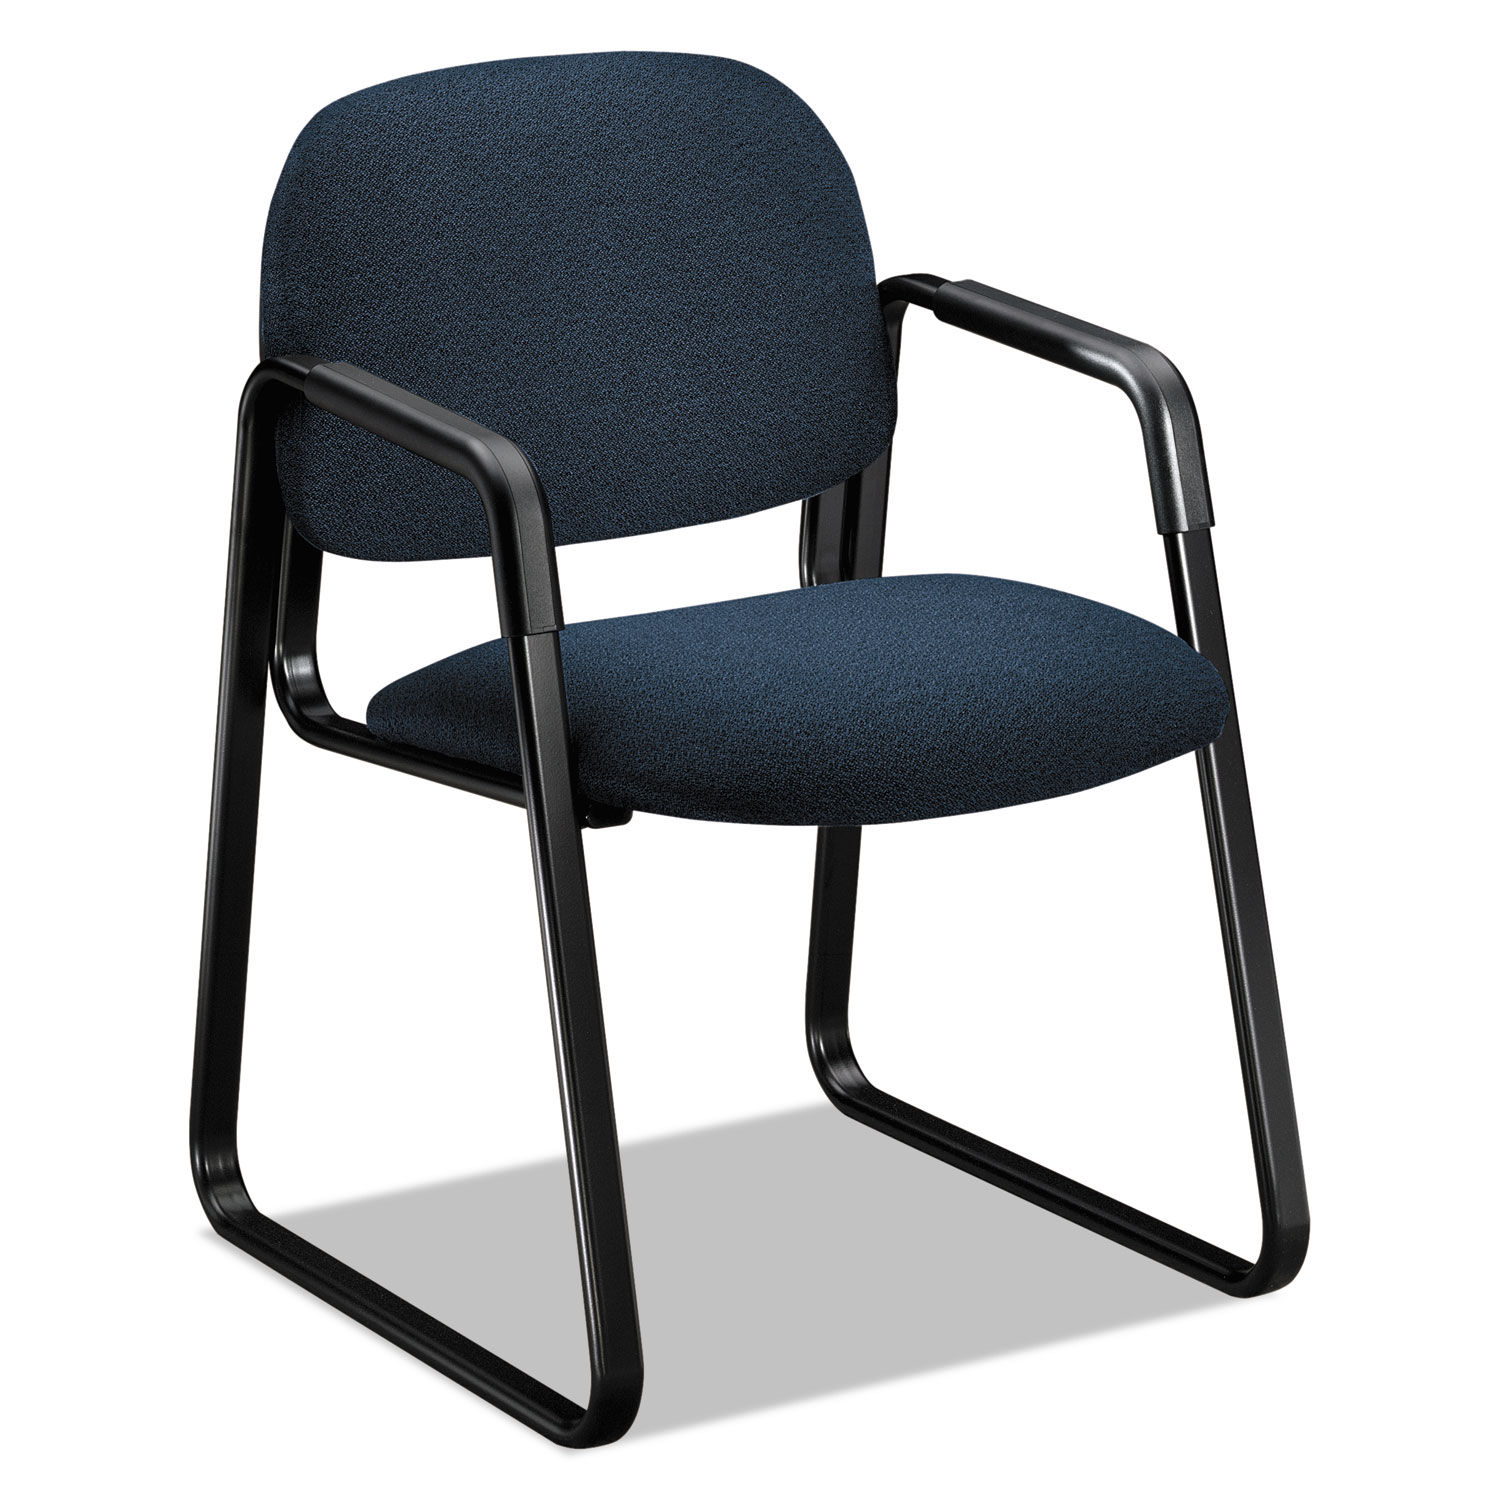 SOLUTIONS SEATING 4000 SERIES SLED BASE GUEST CHAIR 23.5" X 25.5" X 32.5", BLUE SEAT, BLUE BACK, BLACK BASE